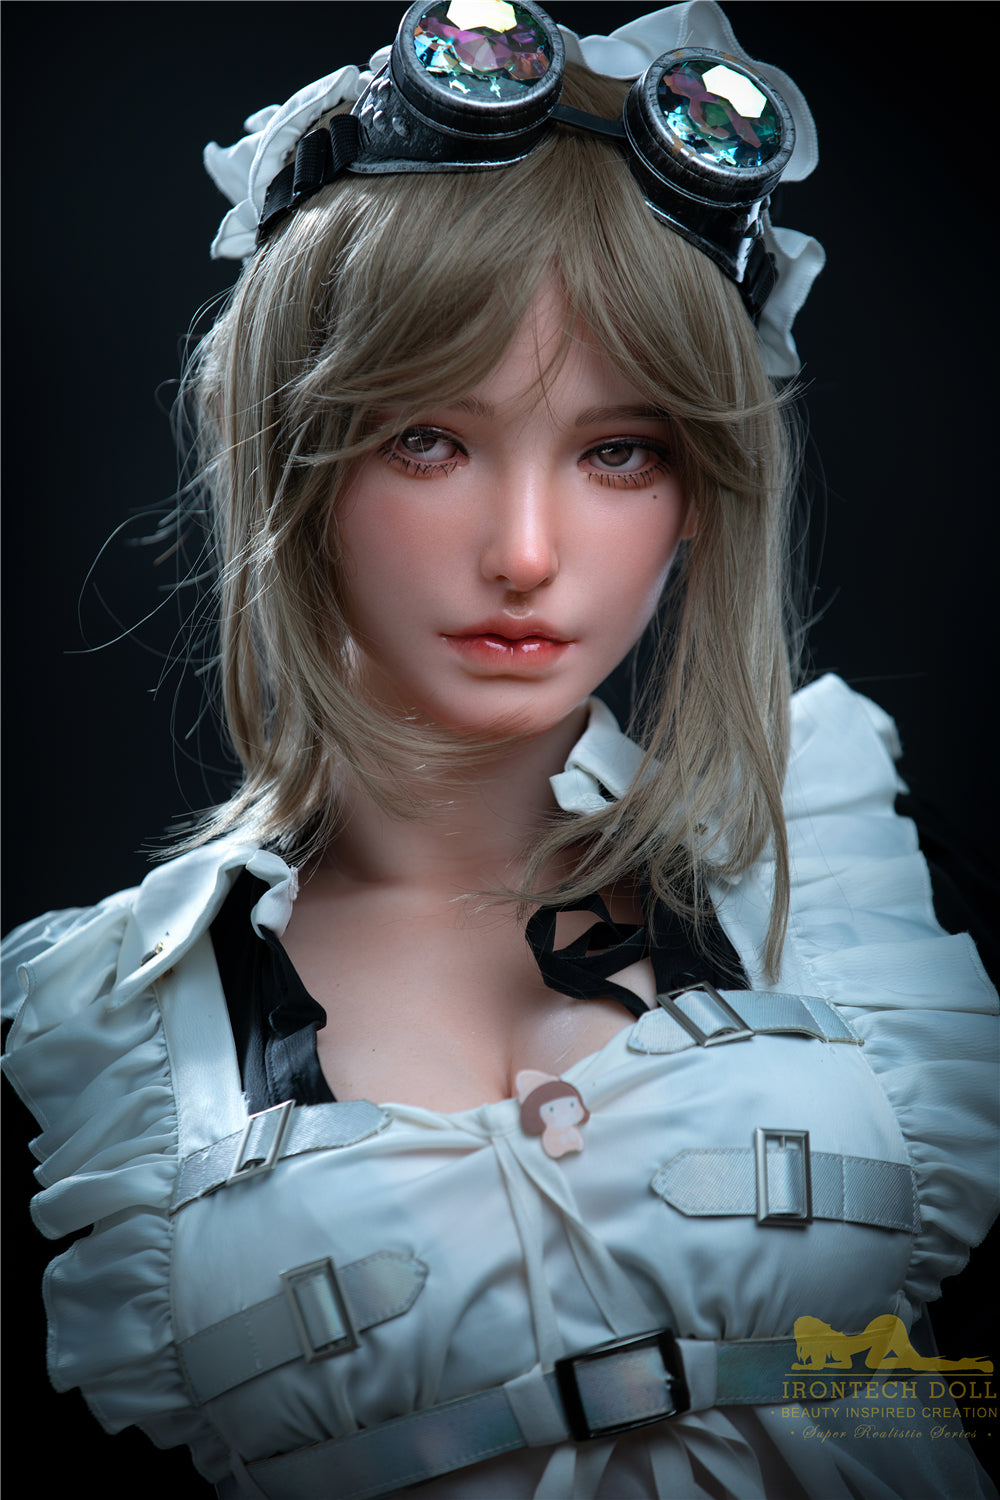 Irontech Doll 165 cm F Silicone - Eva Servant | Buy Sex Dolls at DOLLS ACTUALLY